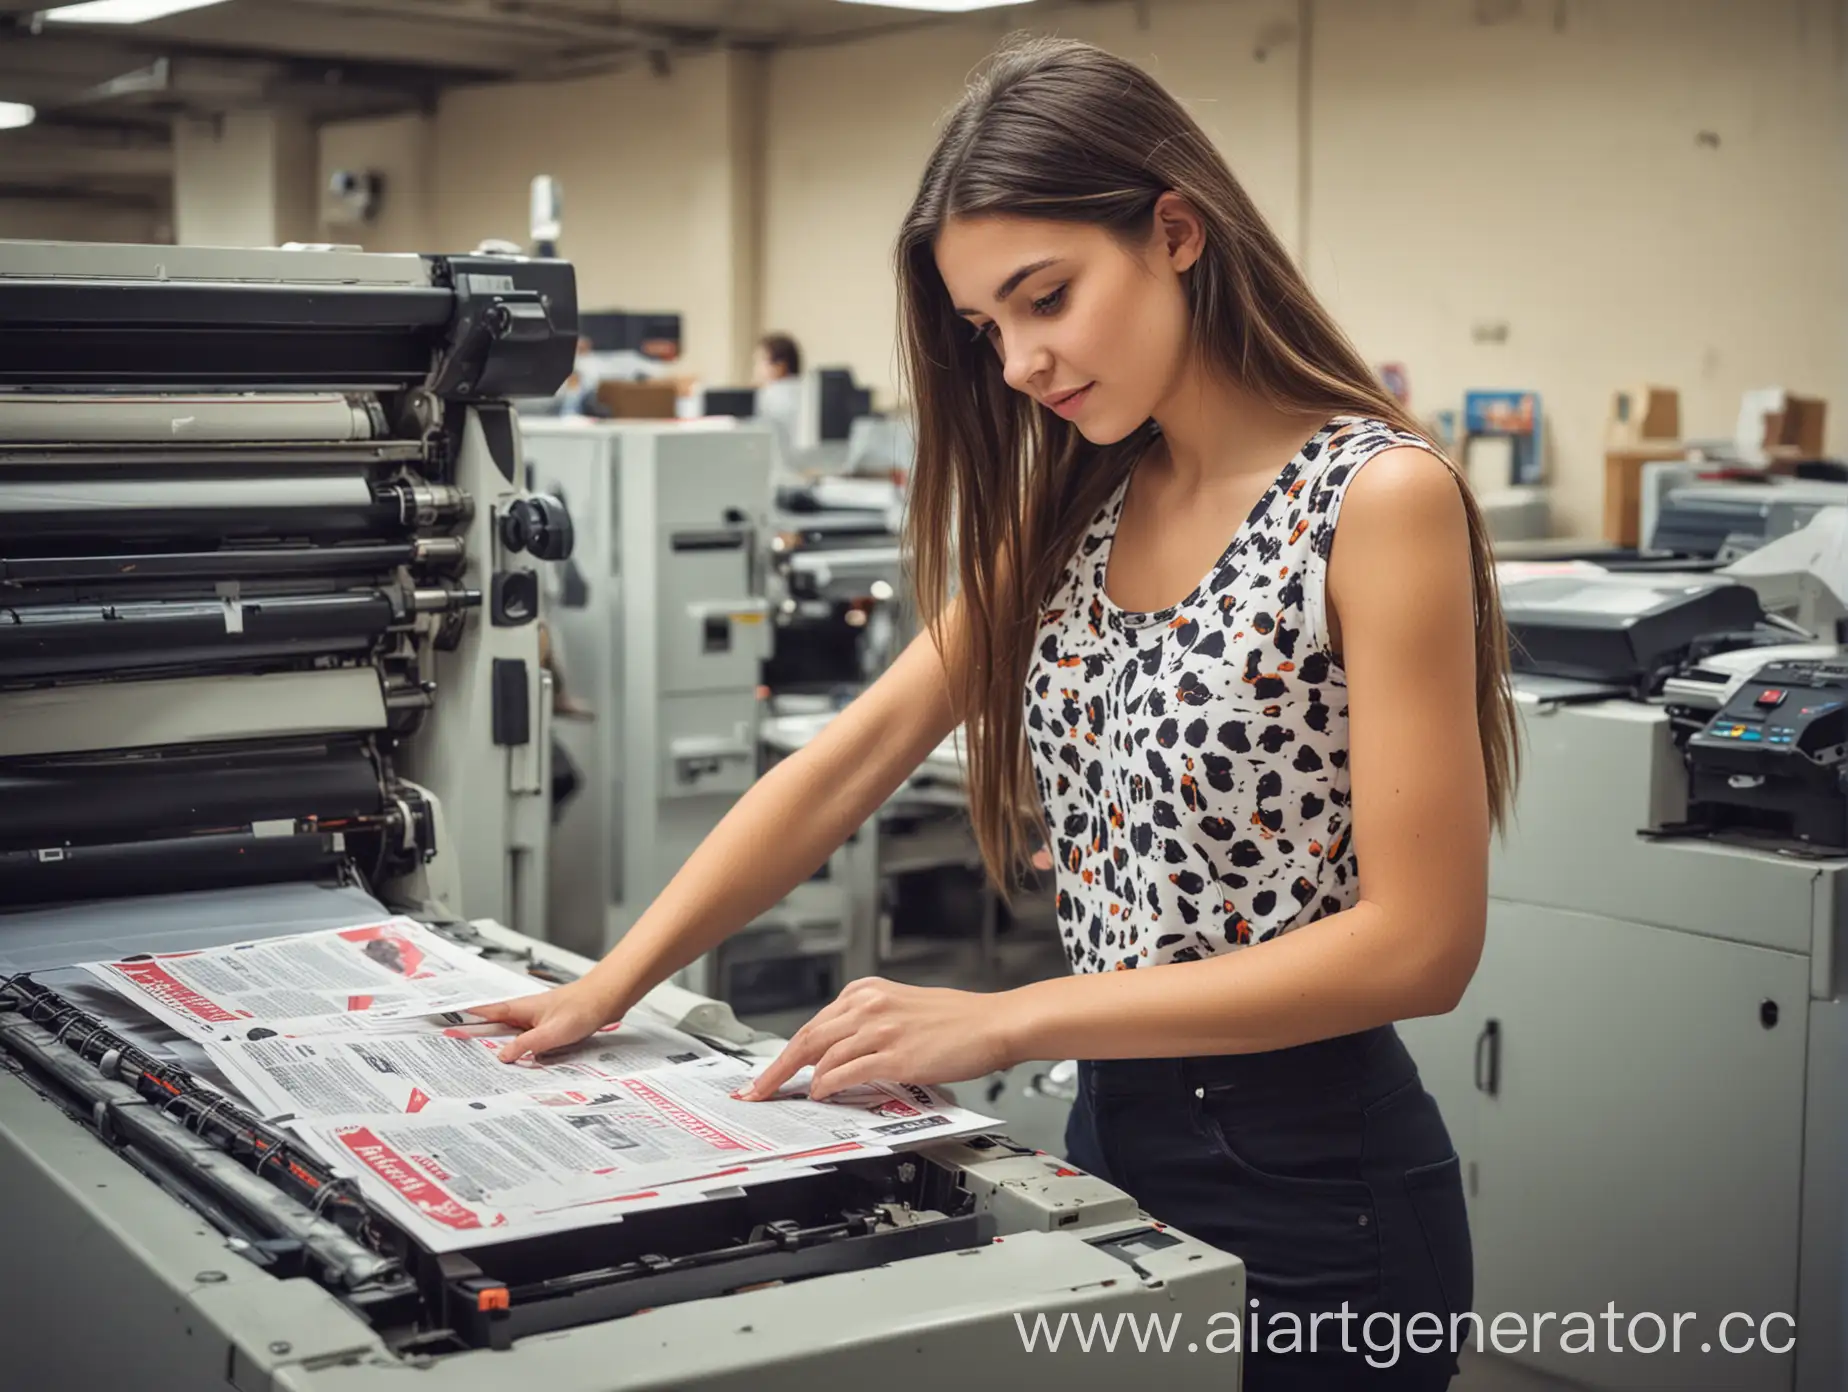 Young-Girl-Printing-Flyers-at-the-Office